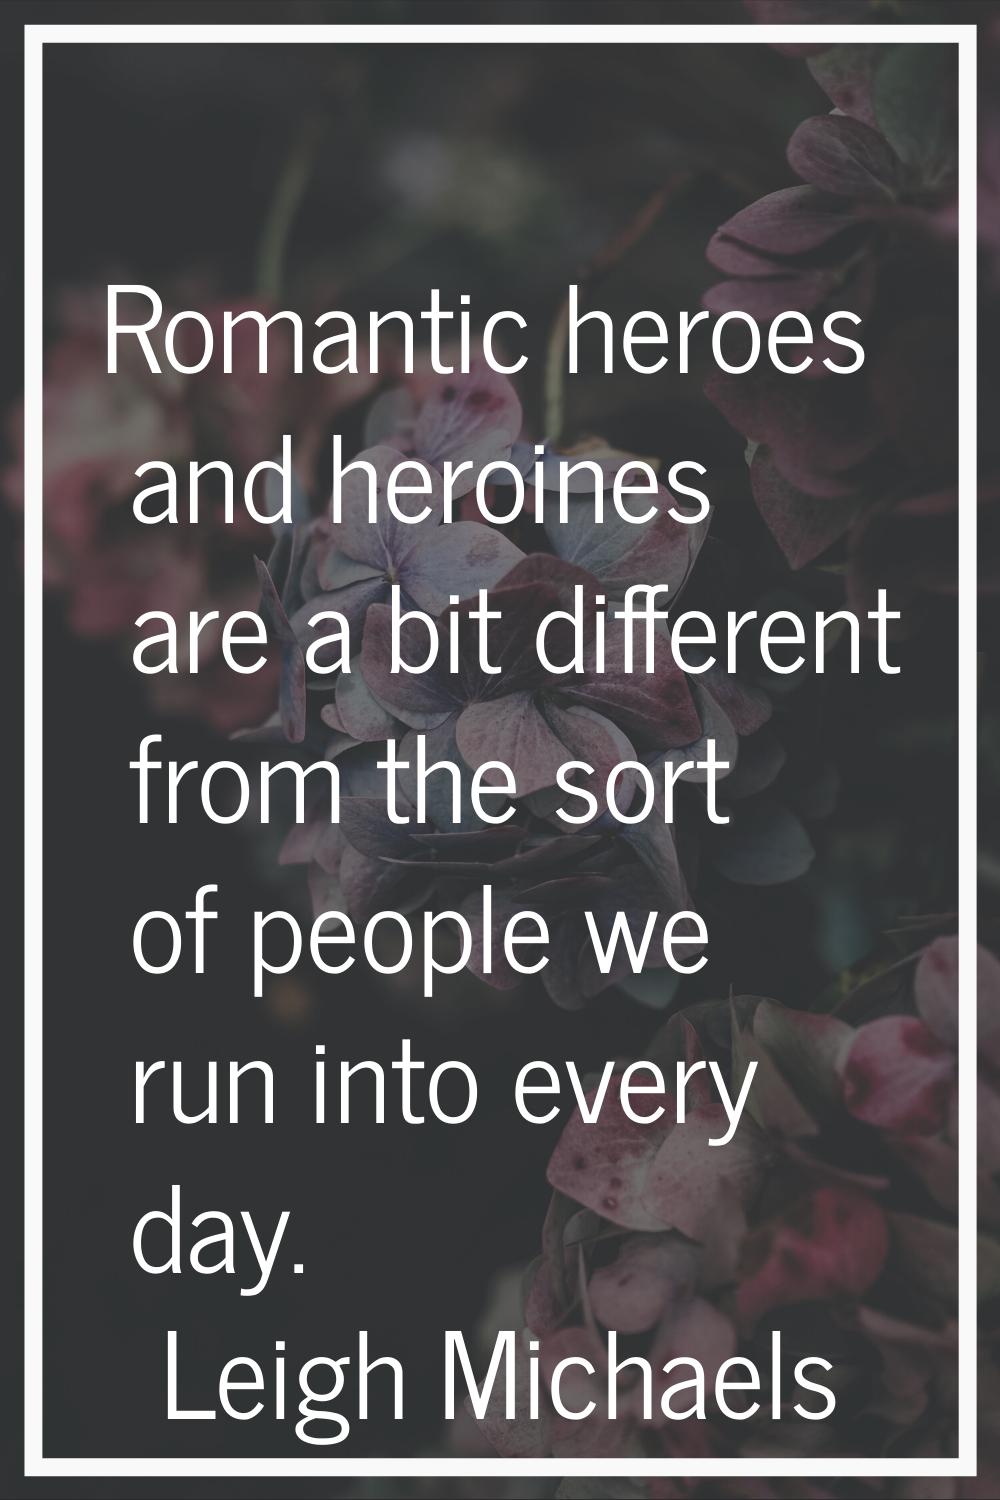 Romantic heroes and heroines are a bit different from the sort of people we run into every day.